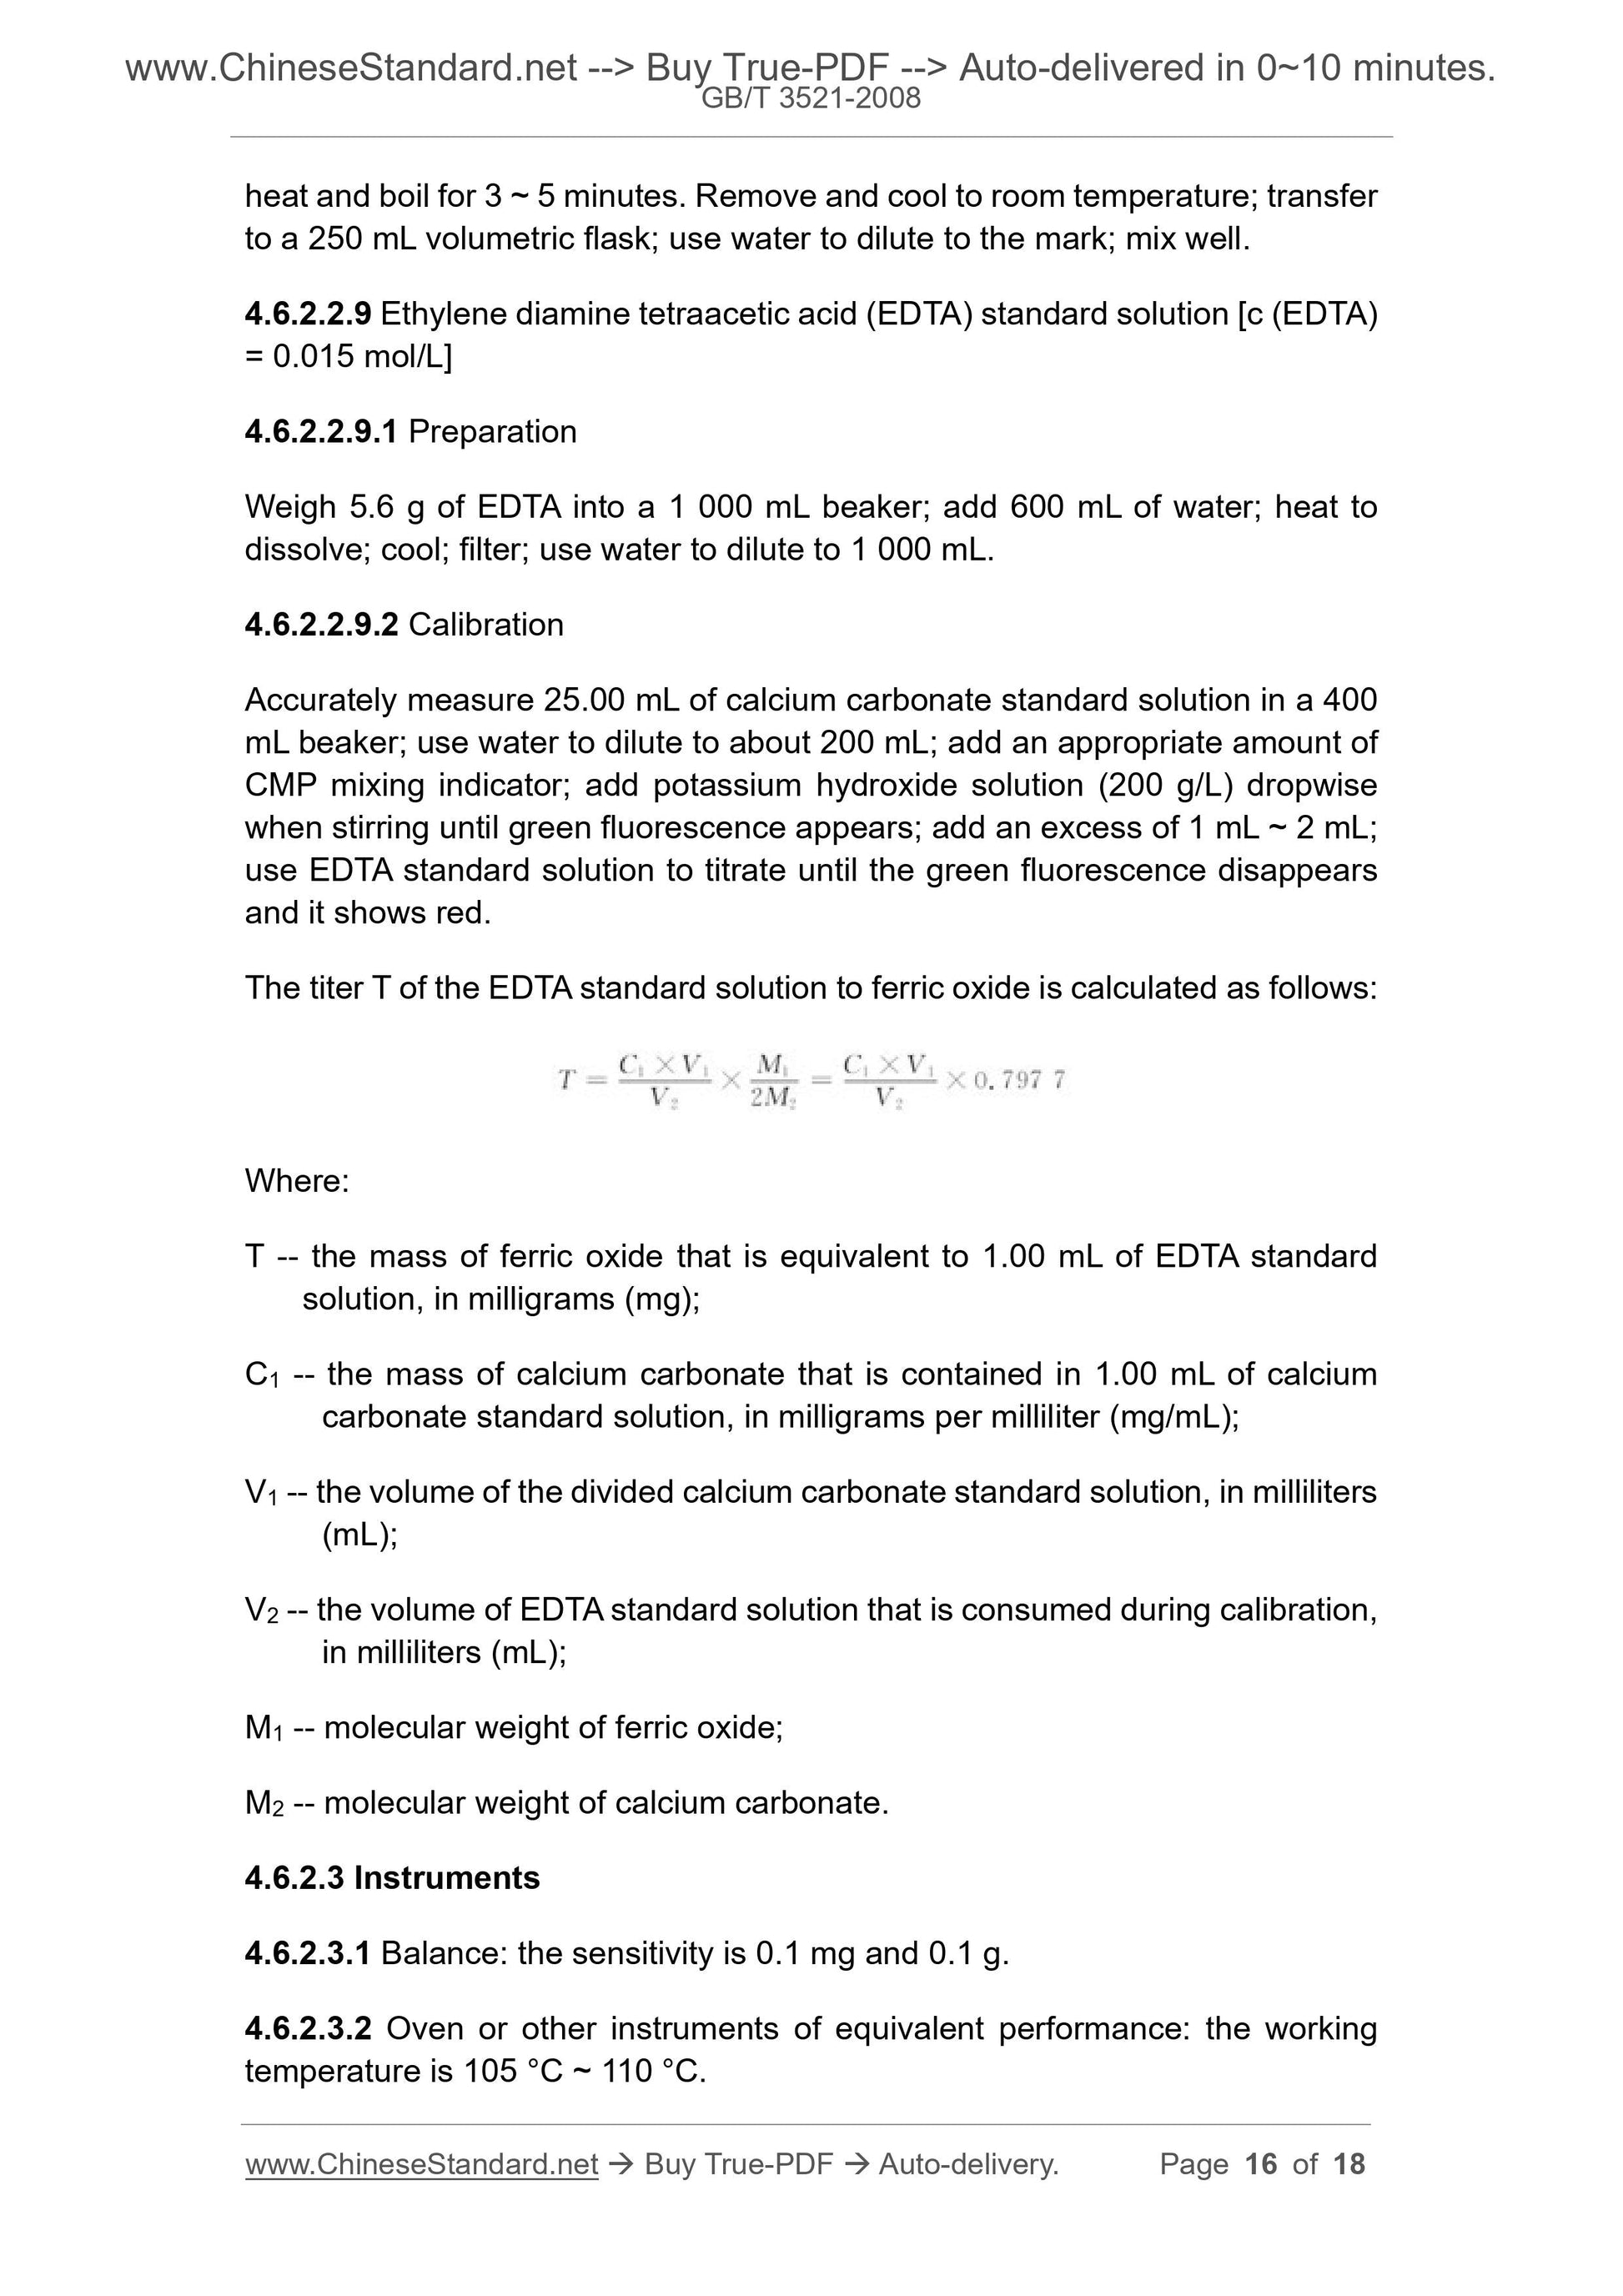 GB/T 3521-2008 Page 8